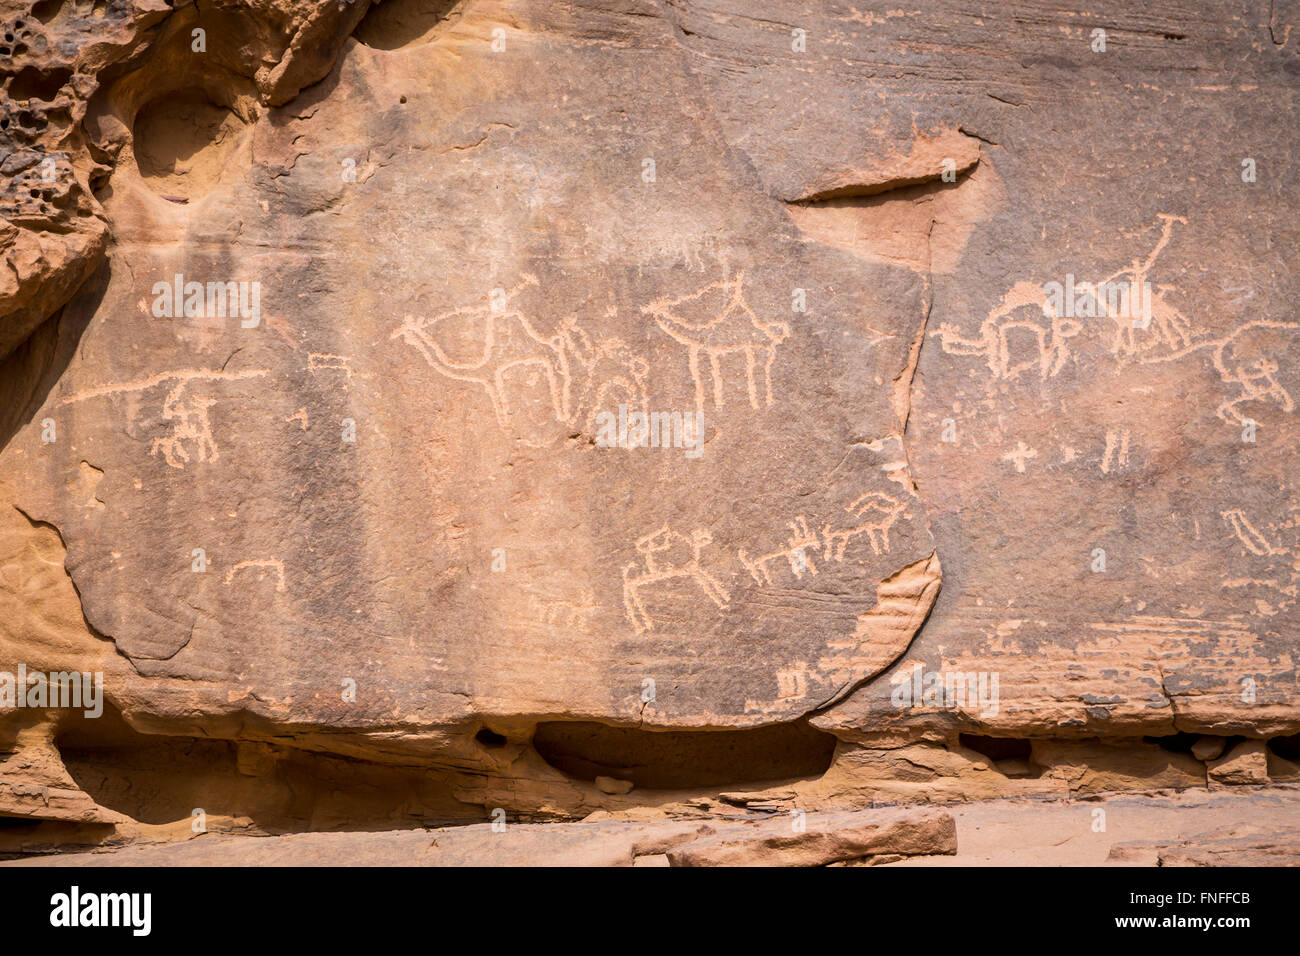 Petroglyphs in the rock in the Wadi Rum desert of southern Hashemite Kingdom of Jordan, Middle East. Stock Photo